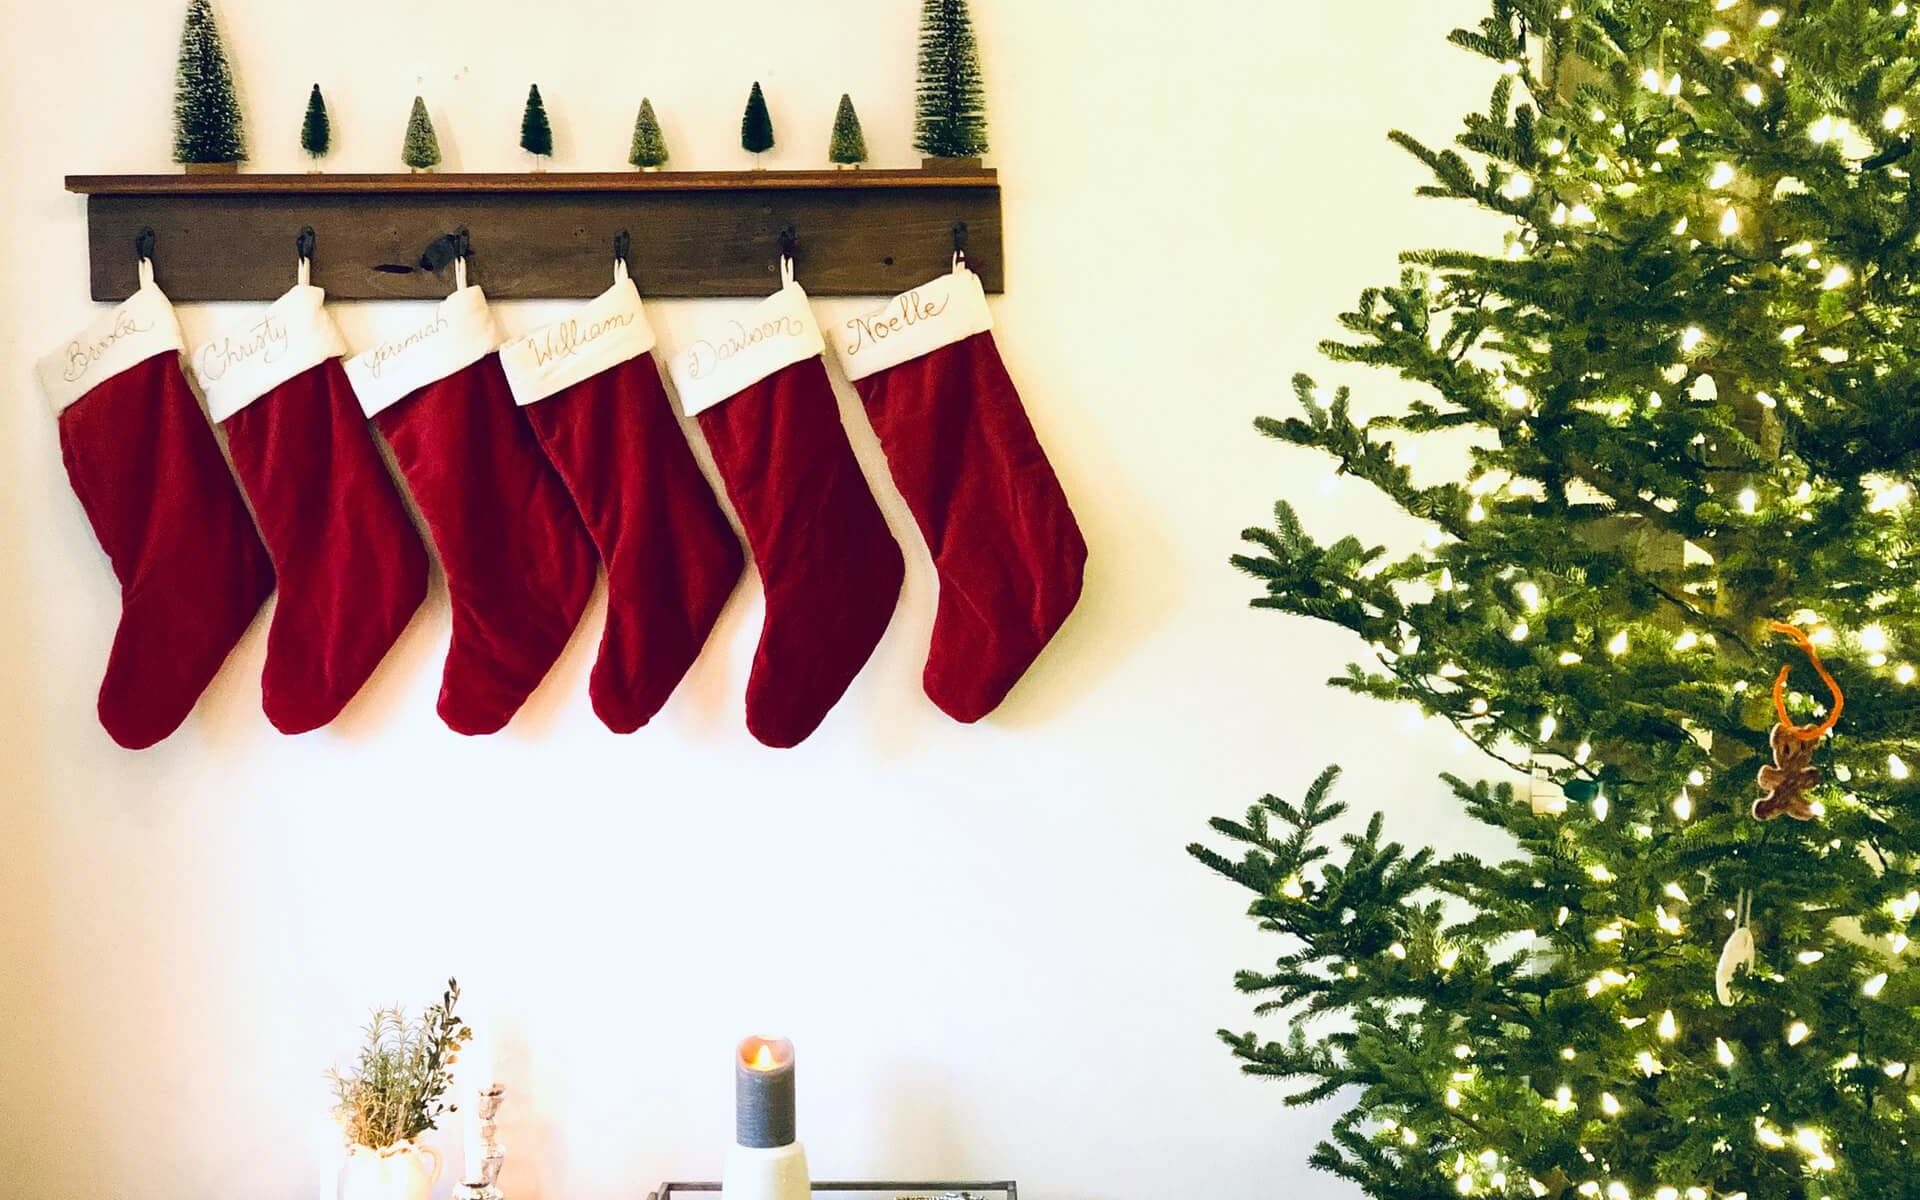 Best tips to have a simple, minimalist Christmas